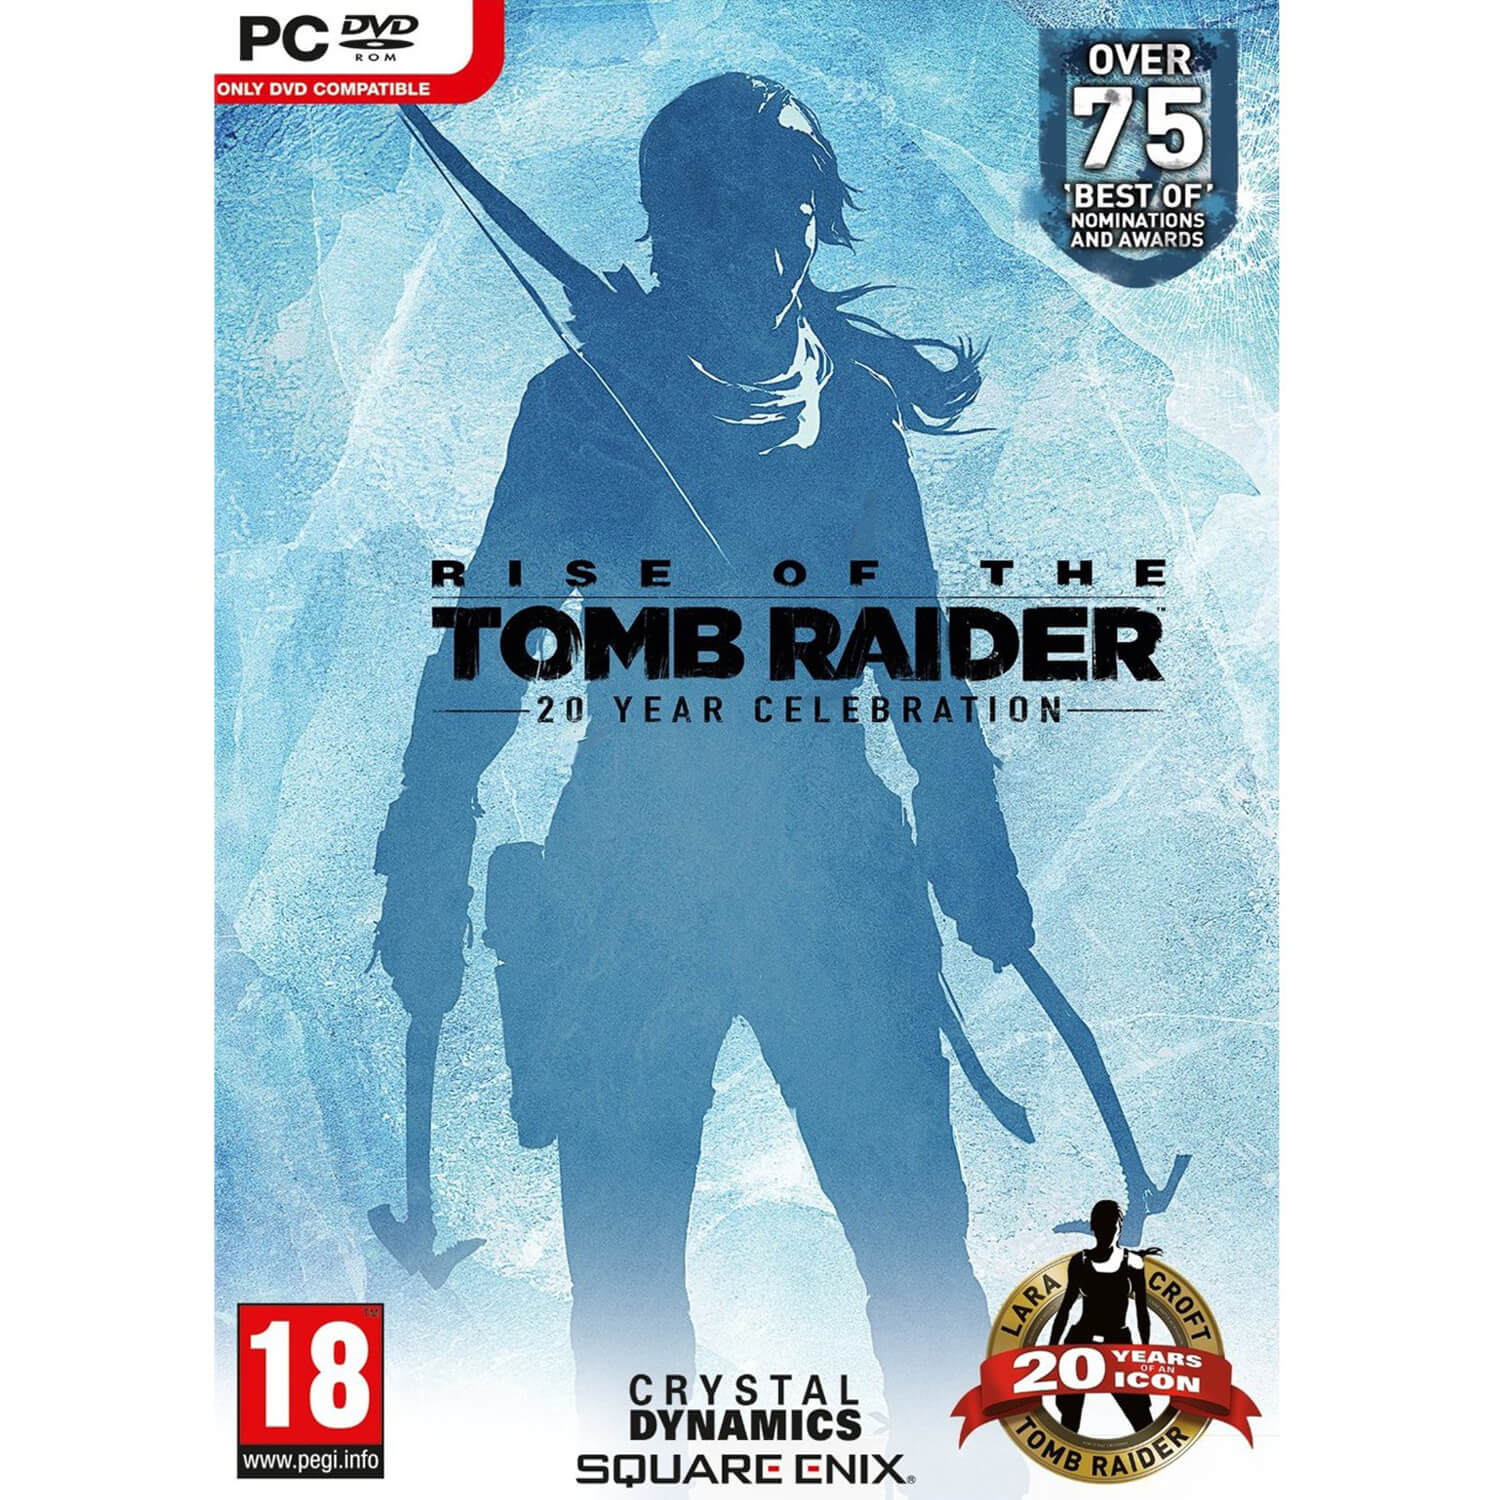  Joc PC Rise of the Tomb Riader 20 Year Celebration 